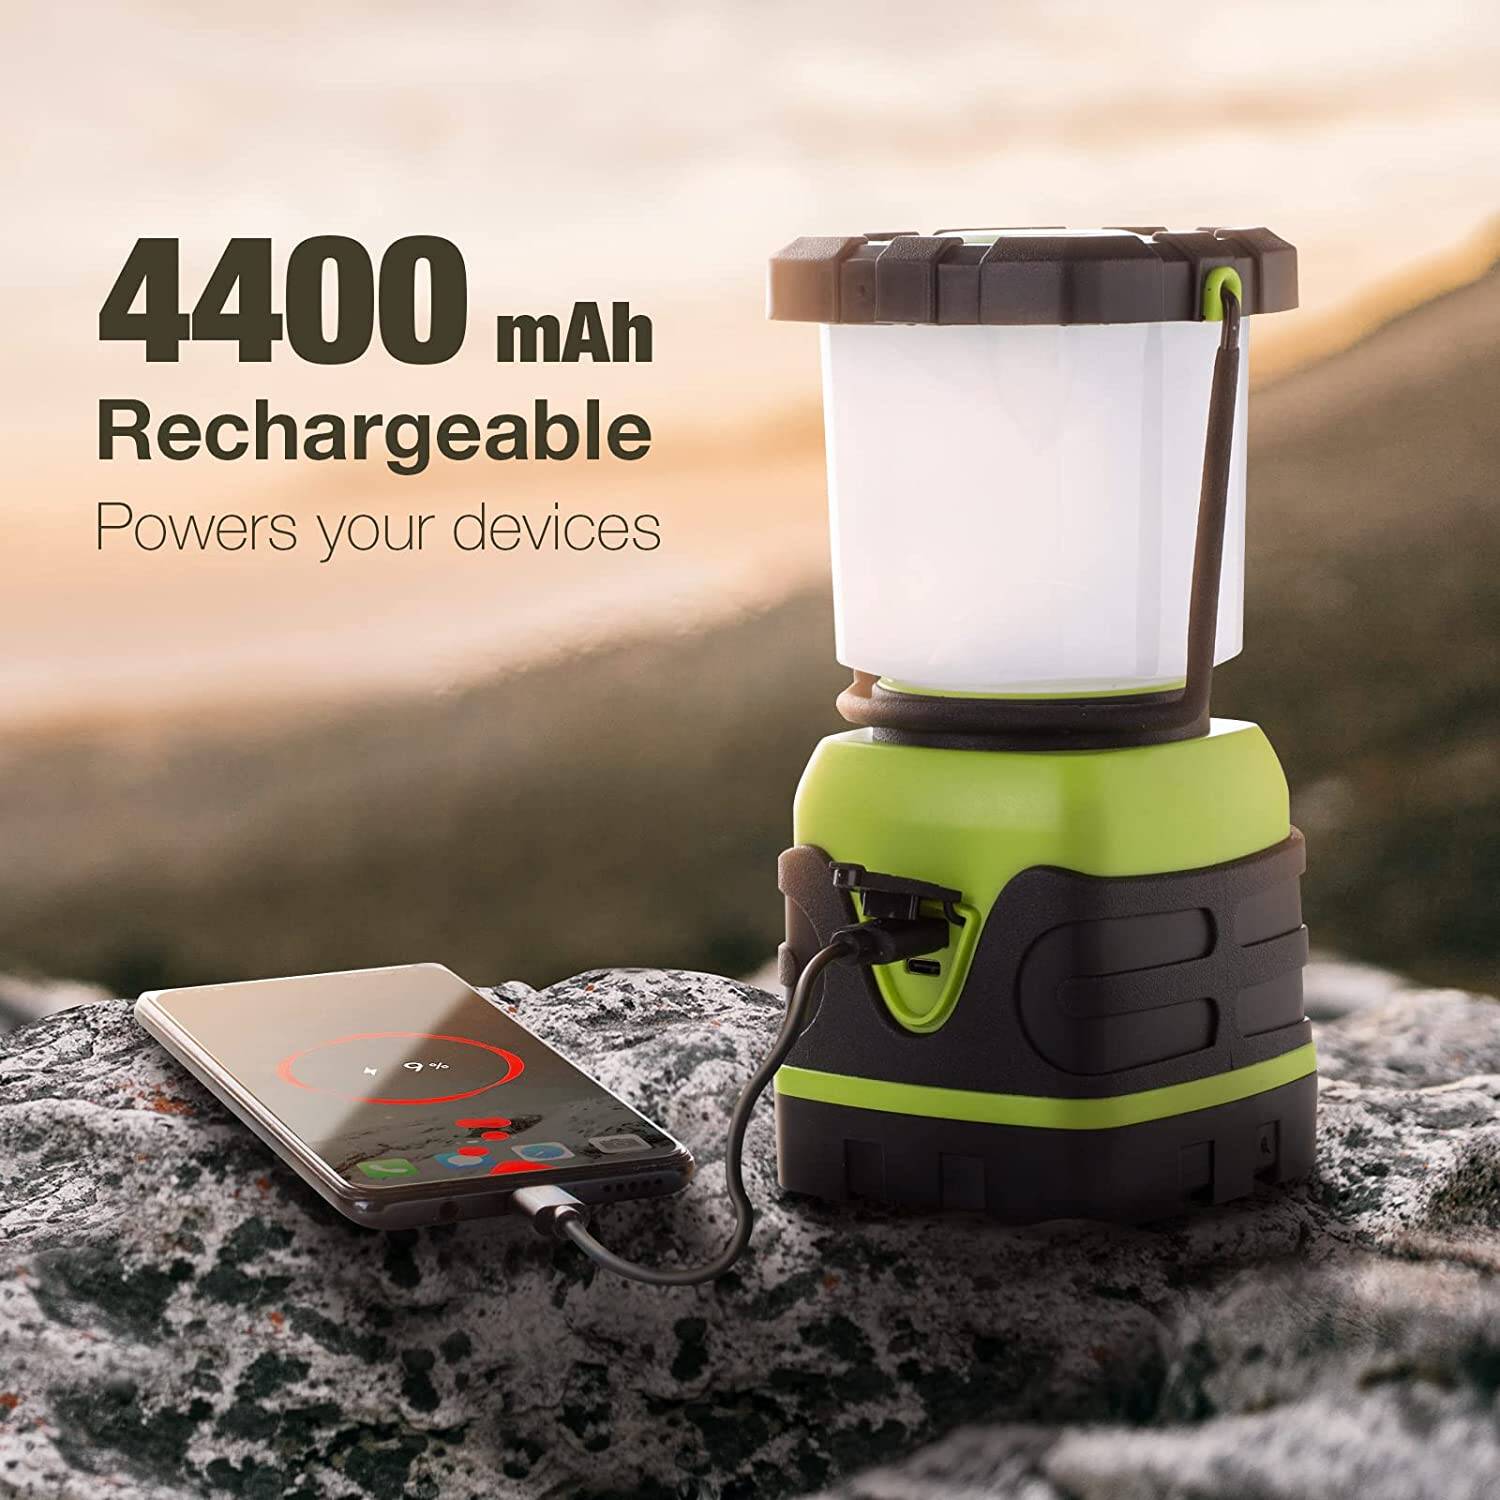 Le LED Camping Lantern Rechargeable 1000lm 4 Light Modes 4400mAh Power Bank IP44 Waterproof Perfect Lantern Flashlight for